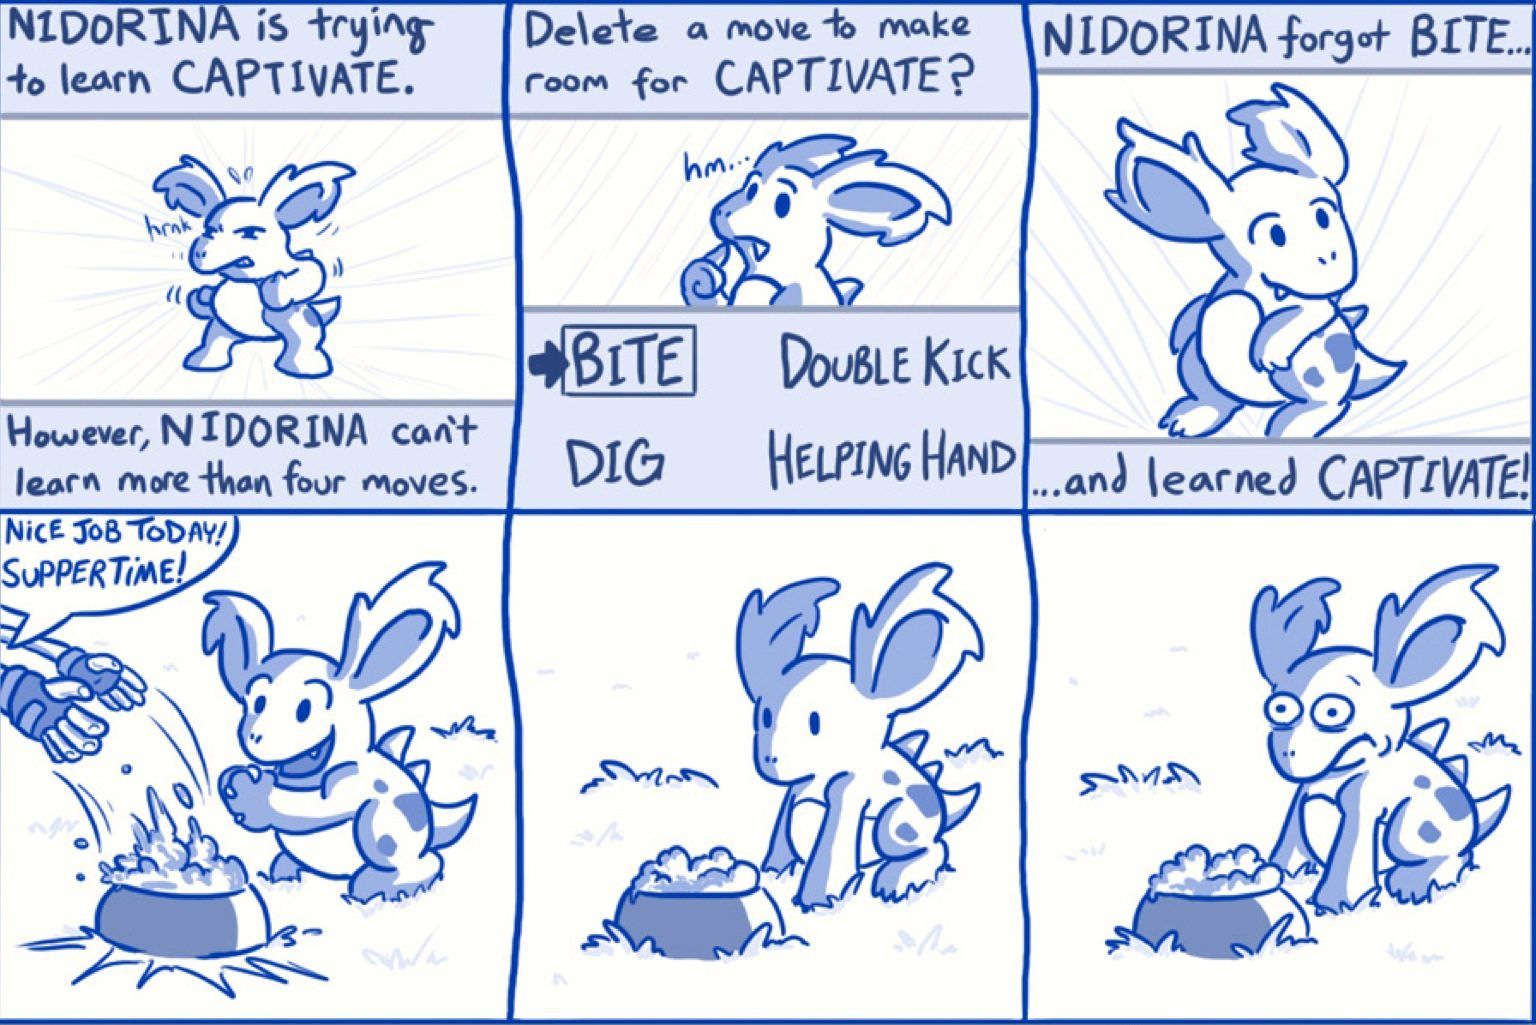 20 Hilarious Pokémon Red Blue And Yellow Comics Only True Fans Will Understand